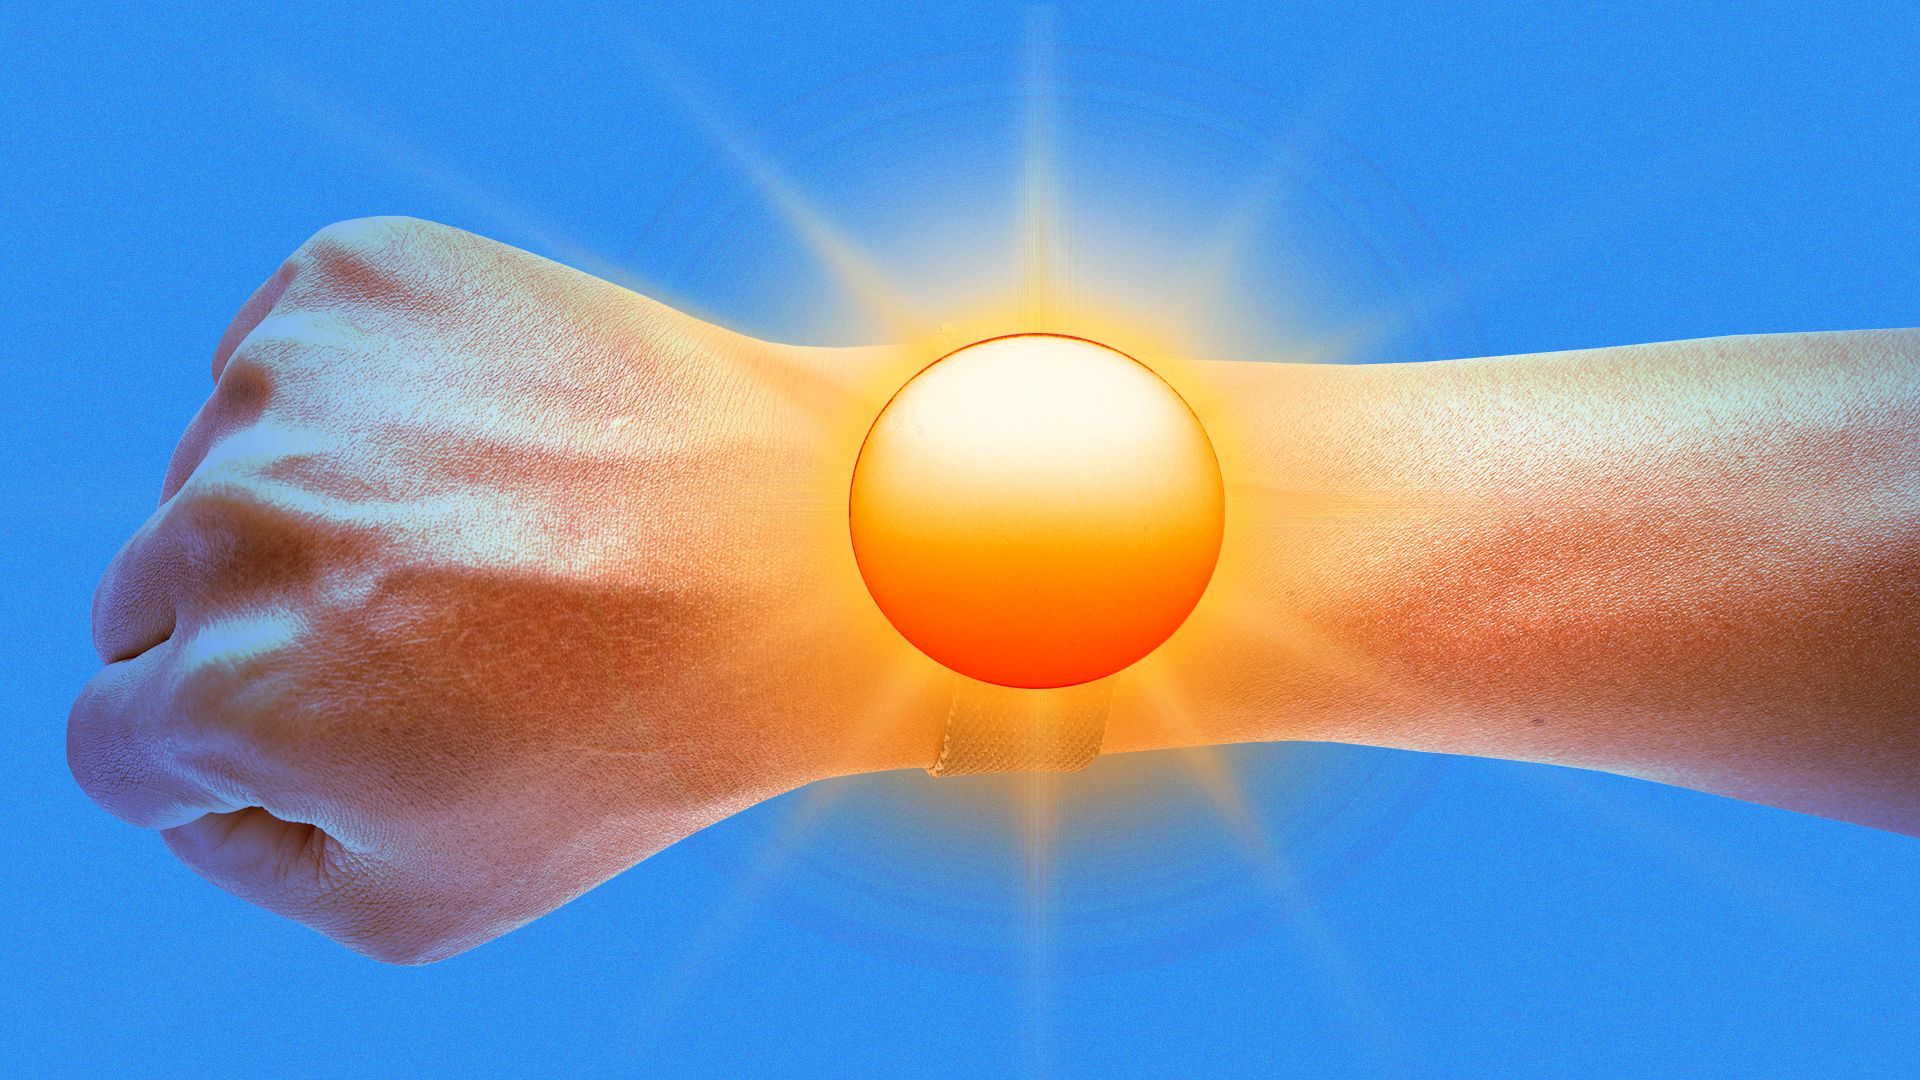 Illustration of a person's arm wearing a wristwatch with the face made from a sun.